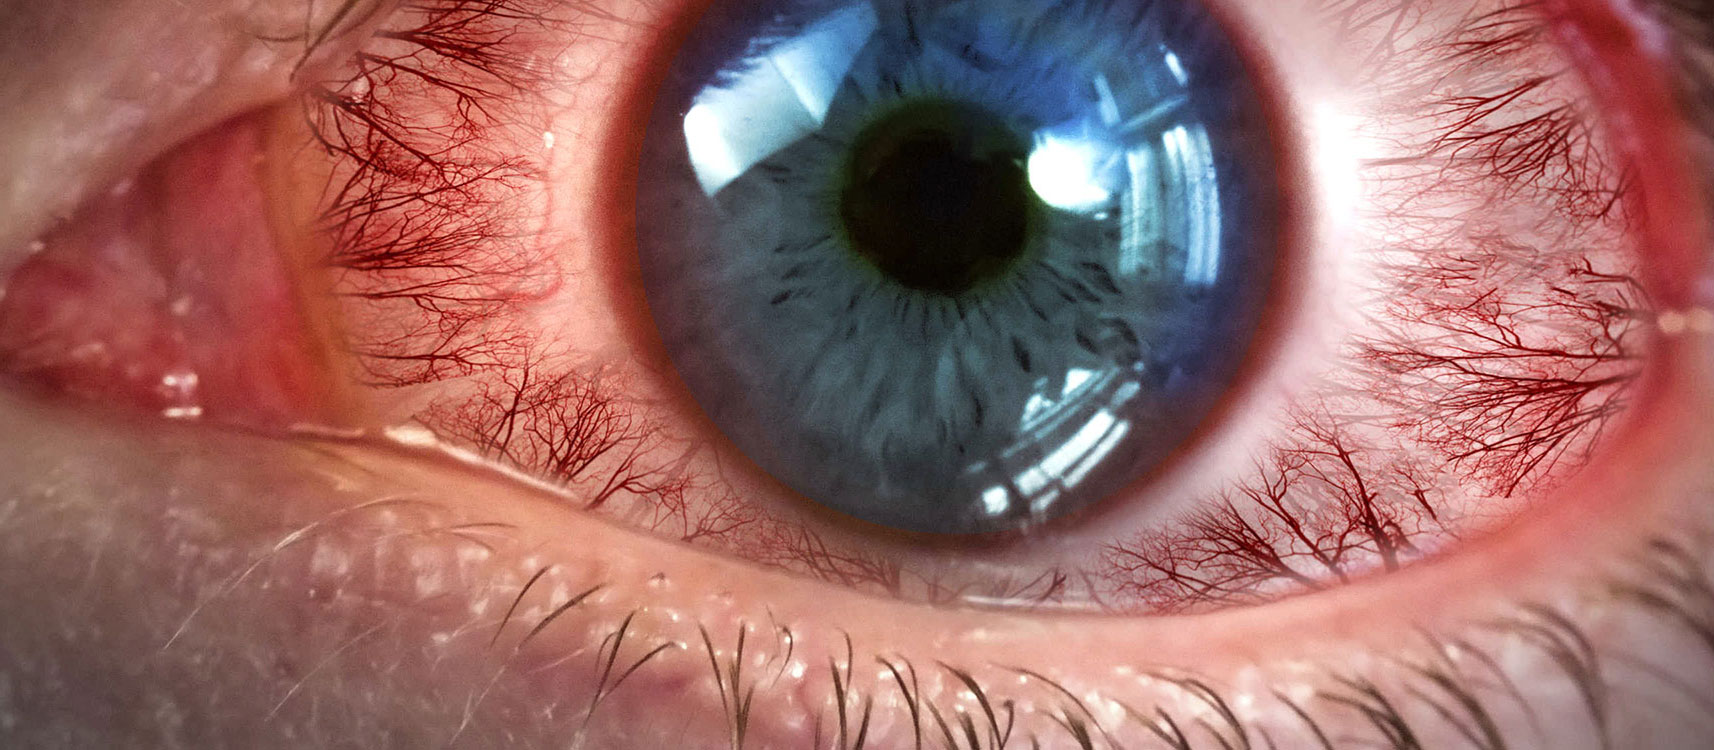 Seen here is a closeup of a wide-open blue-colored human eye that is very bloodshot red.